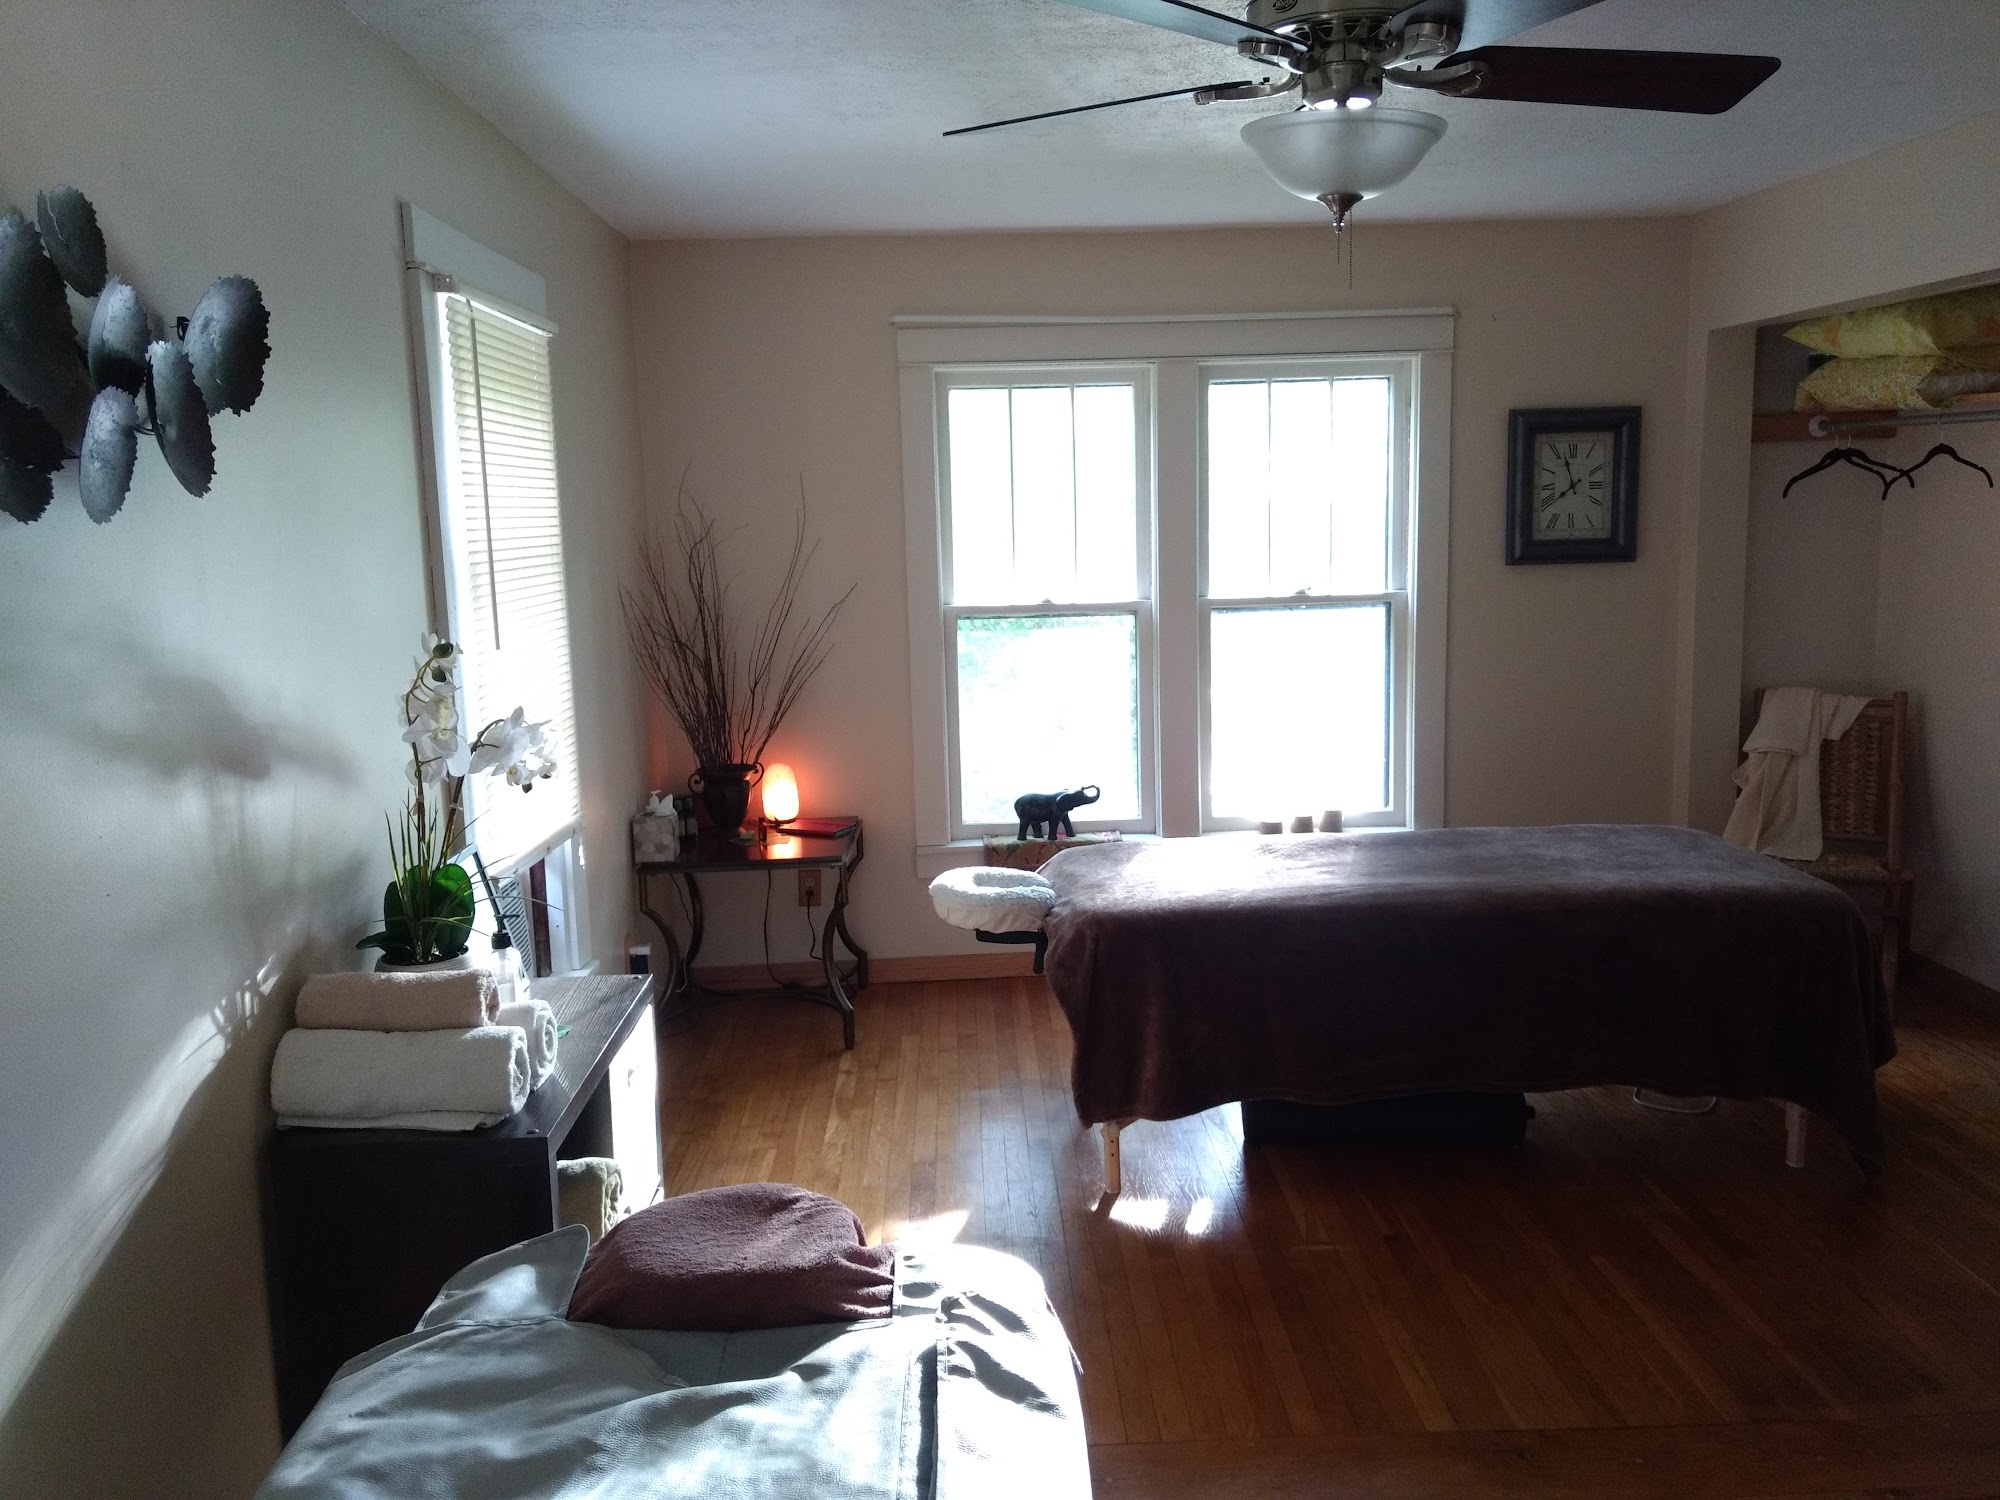 AfterEffect - Restorative Body Therapy | Advanced Massage Therapy 109 W Cayuga St, Bellaire Michigan 49615